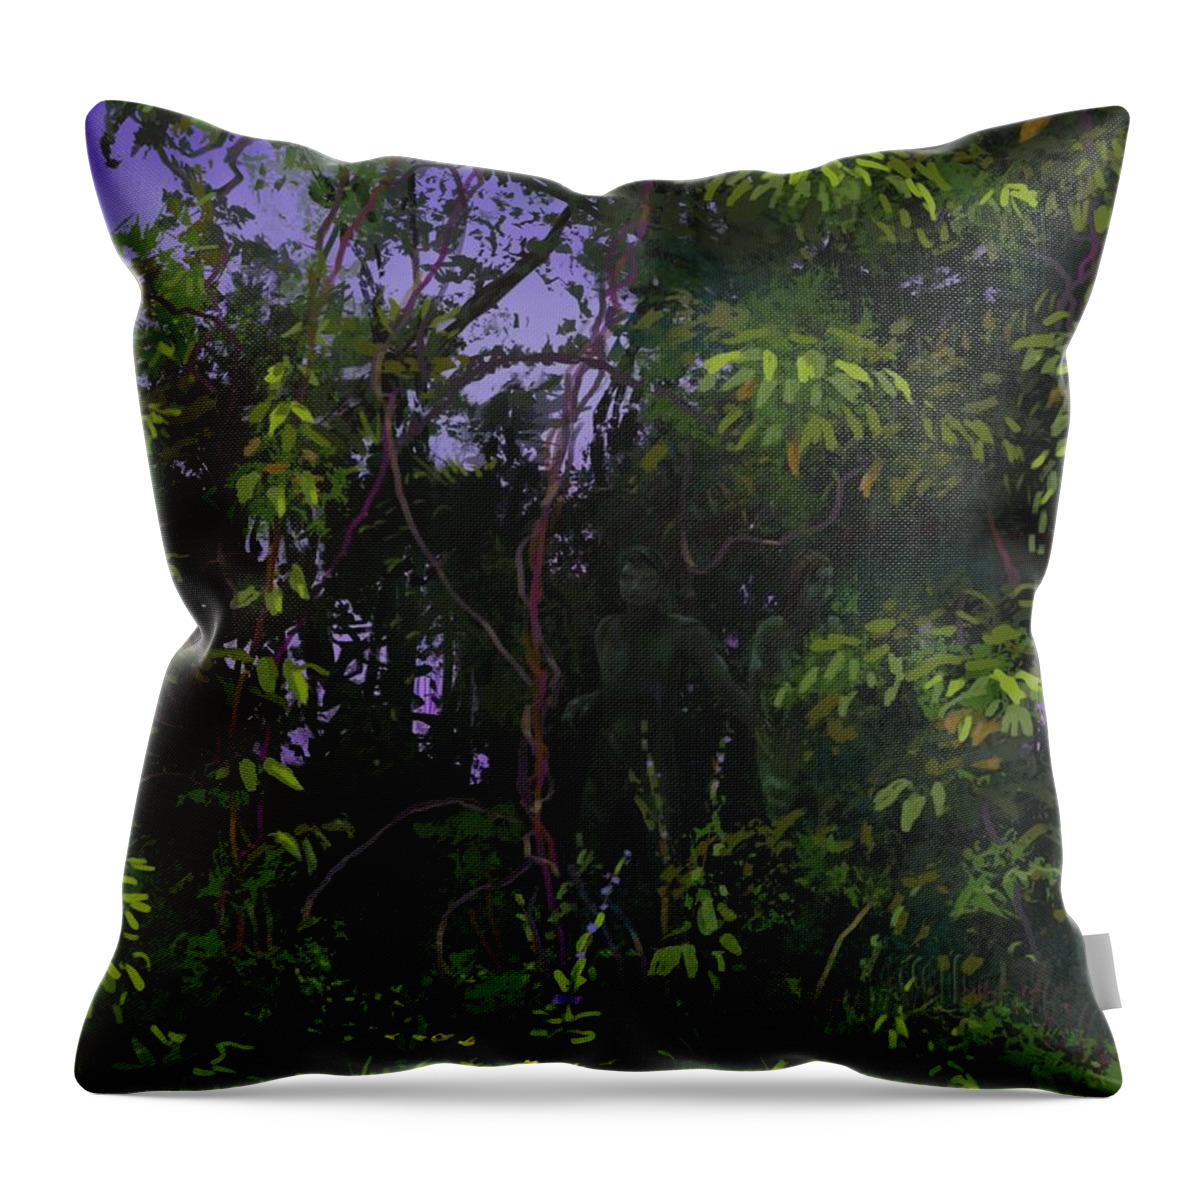 Garden Throw Pillow featuring the painting In The Garden by Don Morgan